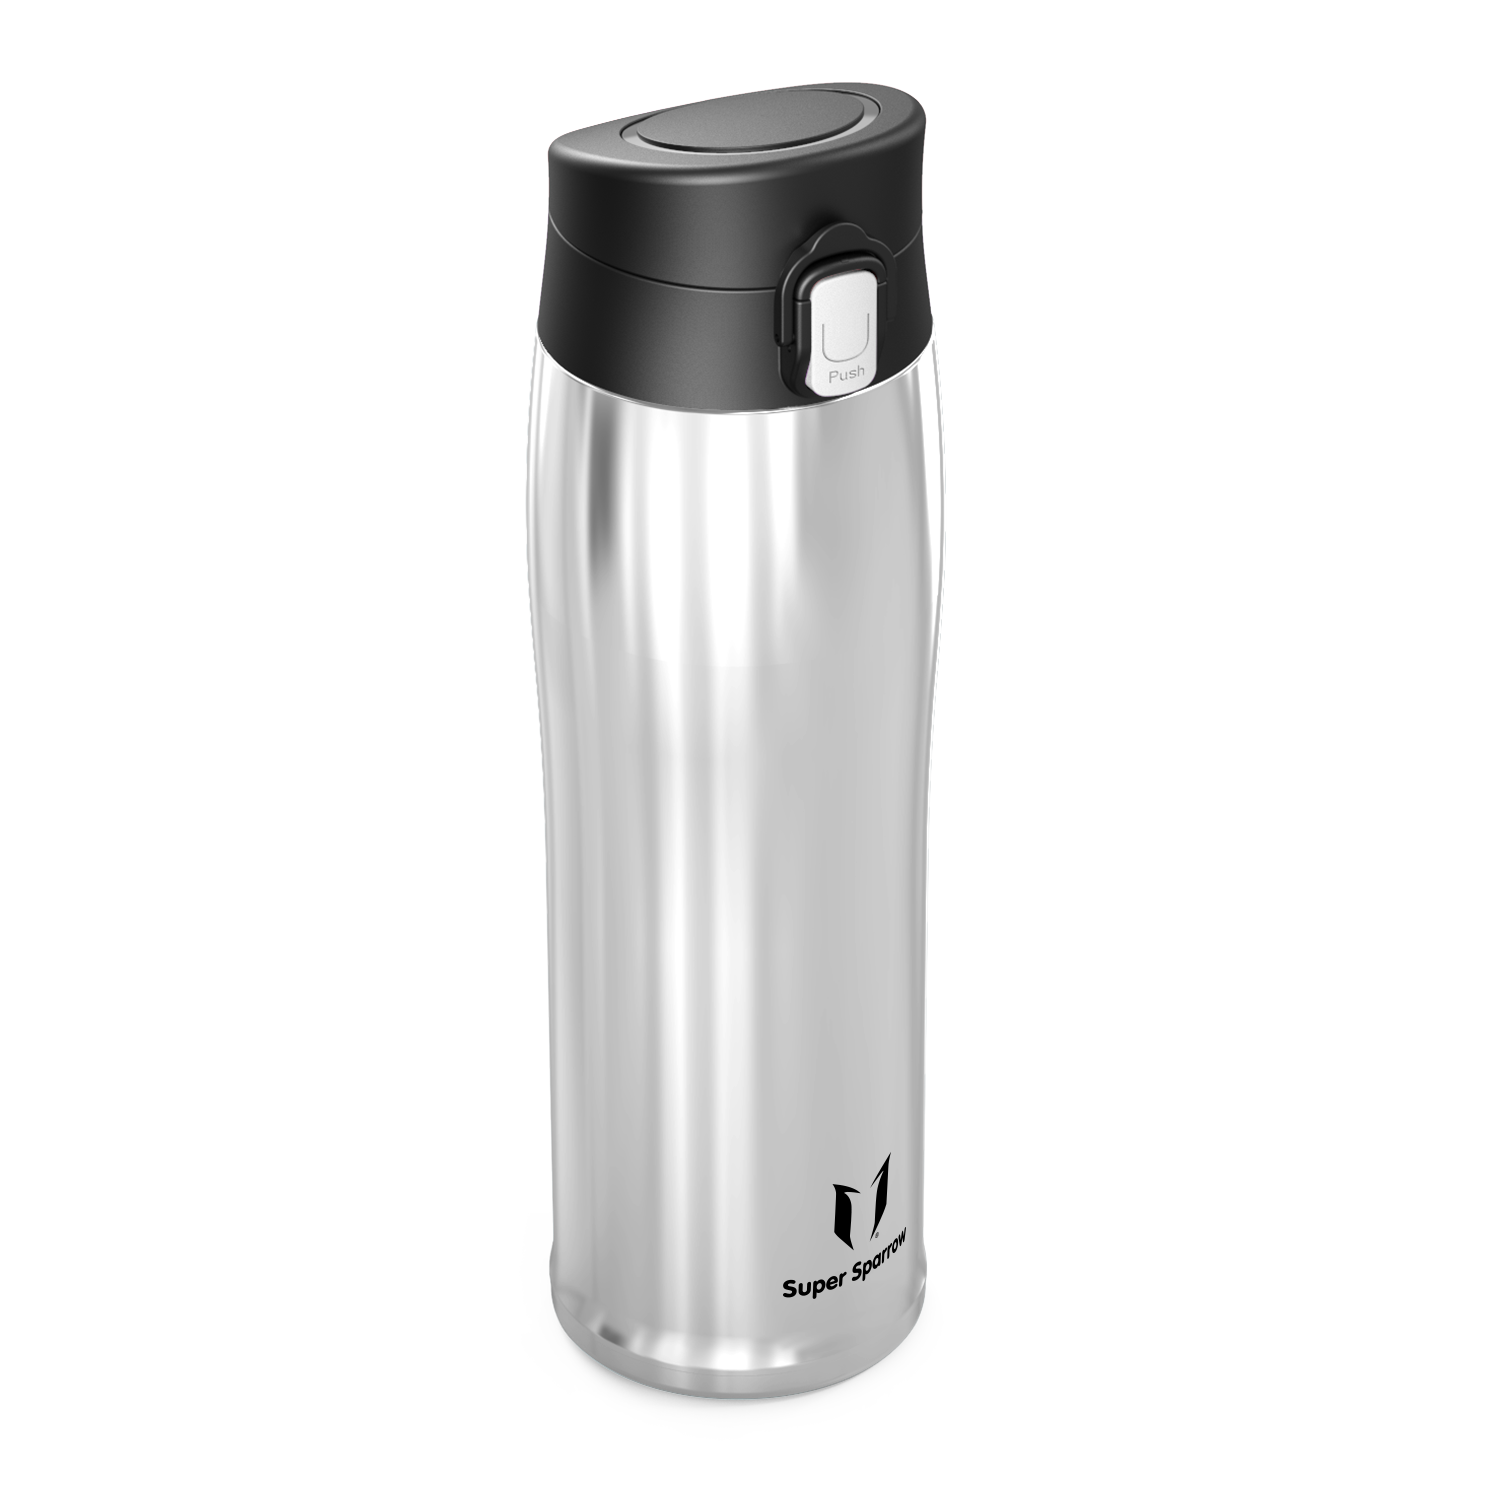 Super Sparrow 1000ML To-Go Stainless Steel Water Bottle, Sea Blue